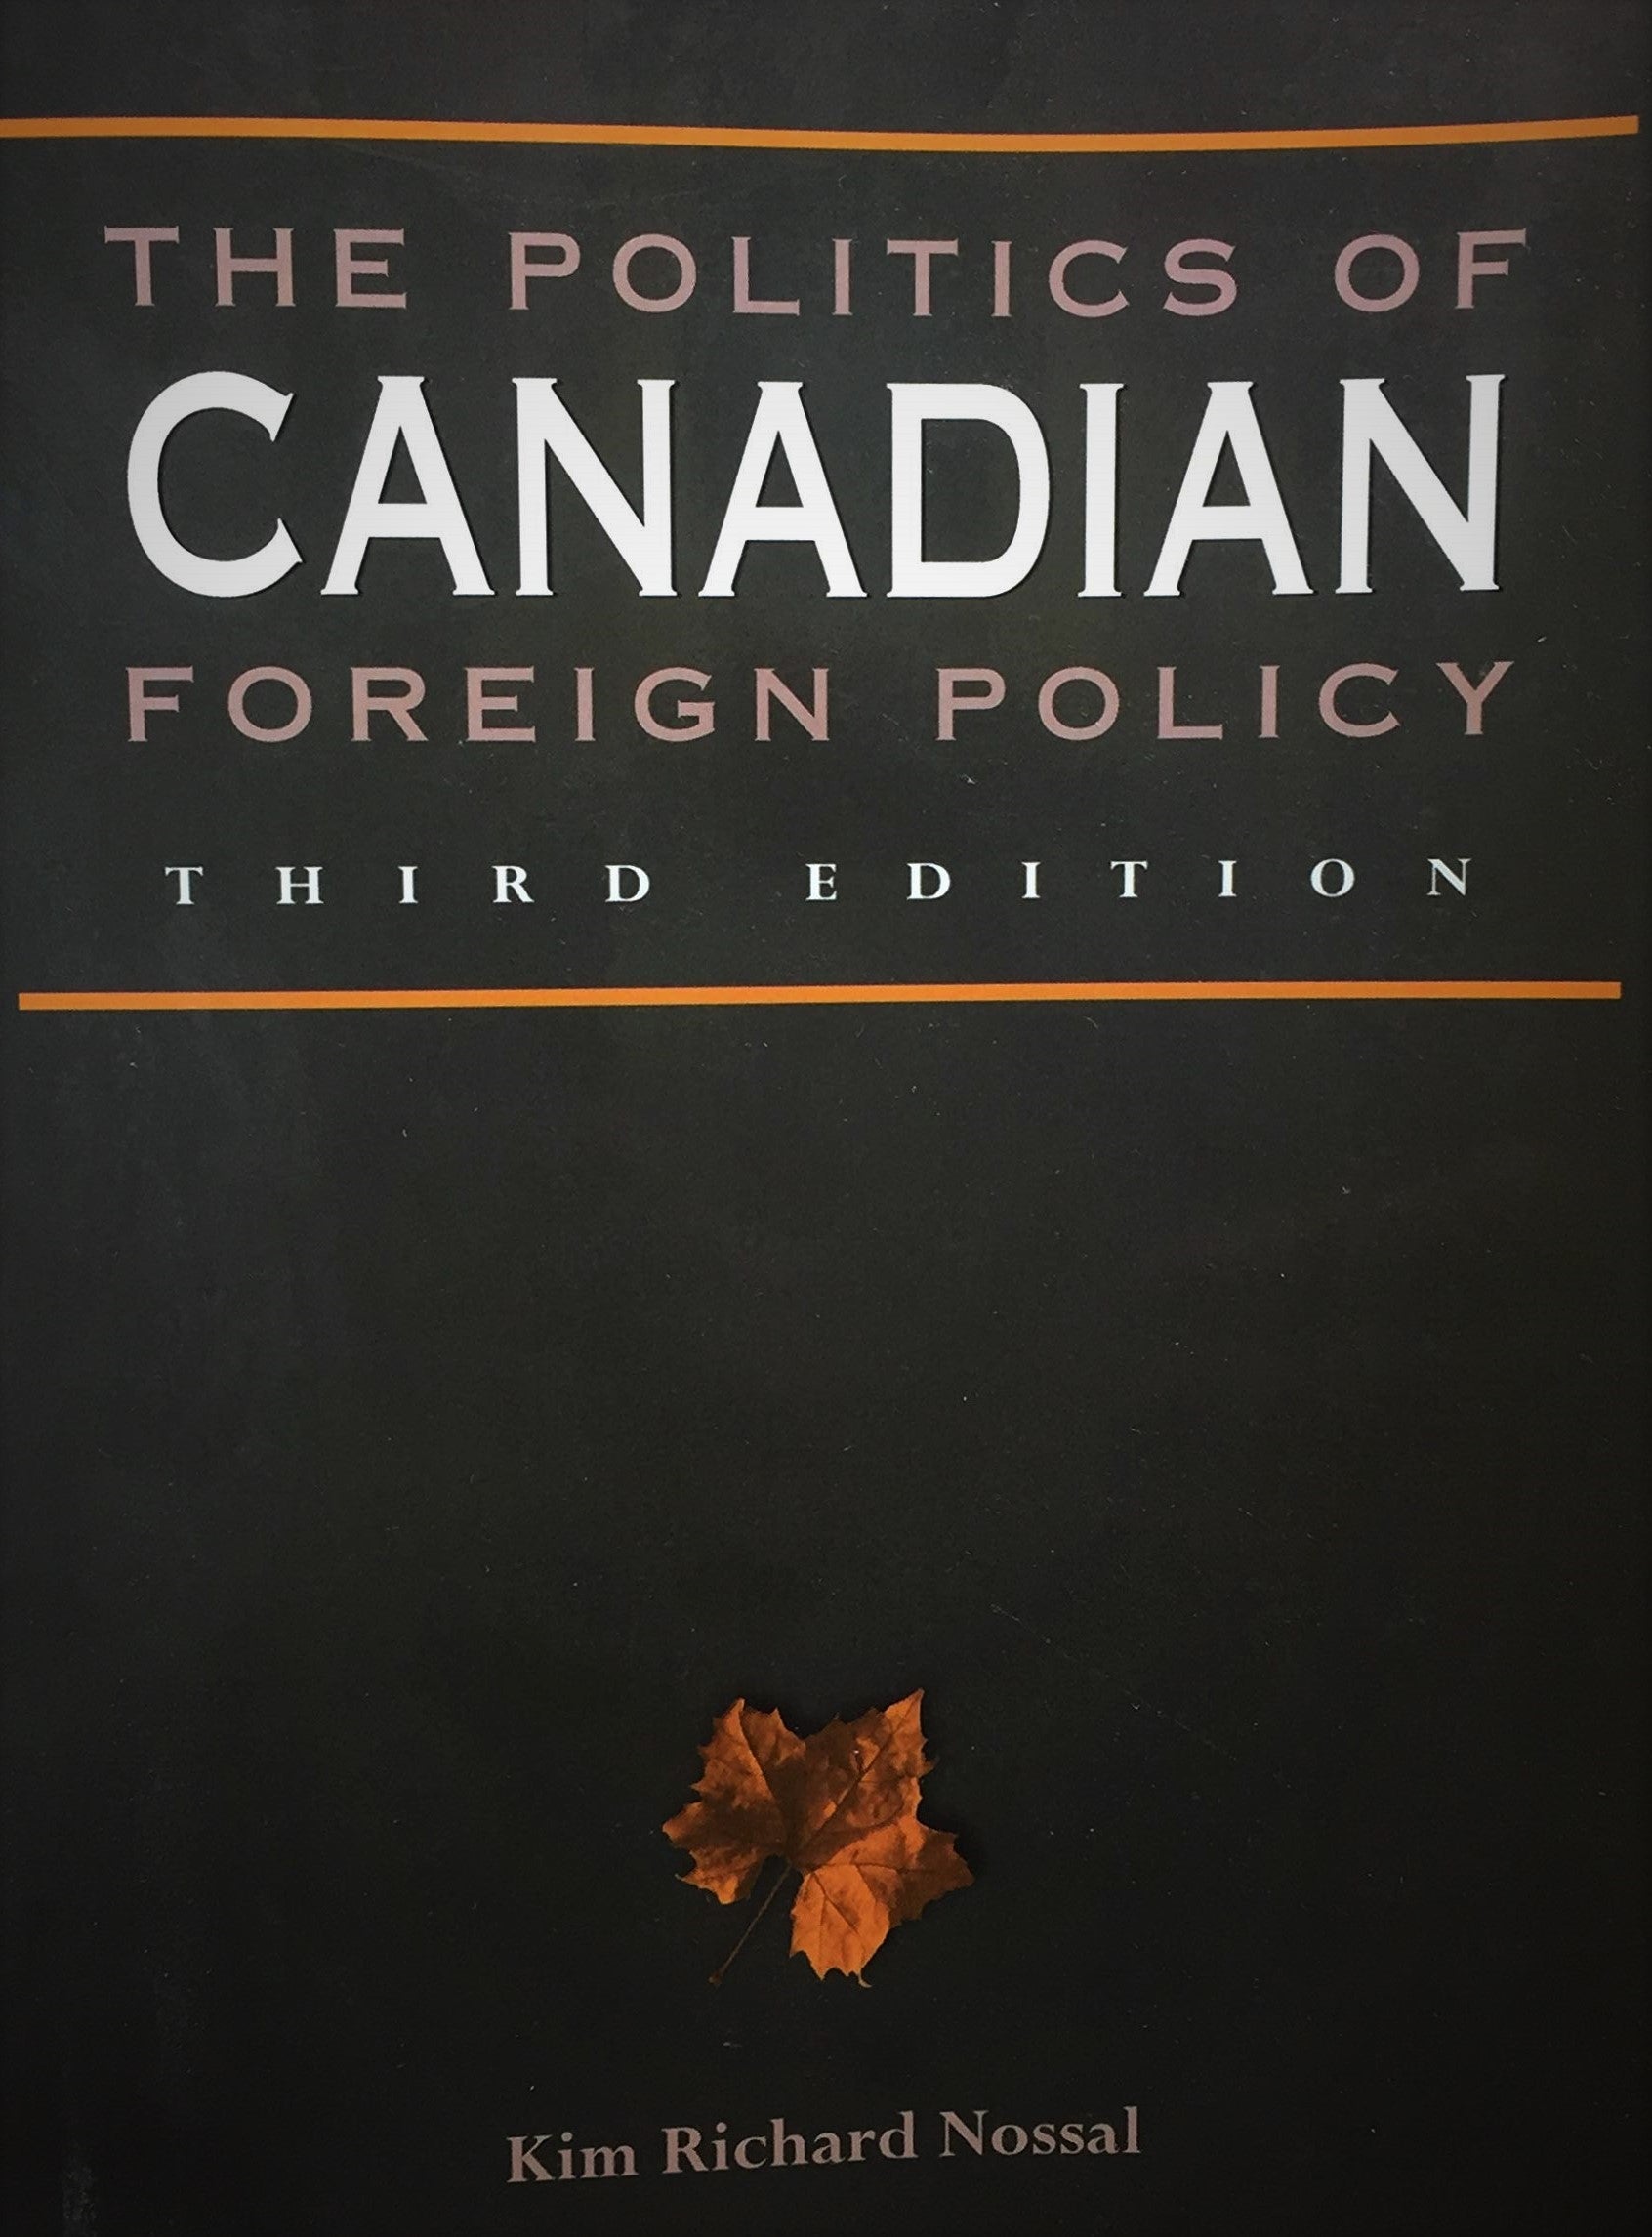 Livre ISBN 0132568357 The politics of Canadian foreign policy (Kim Richard Nossal)